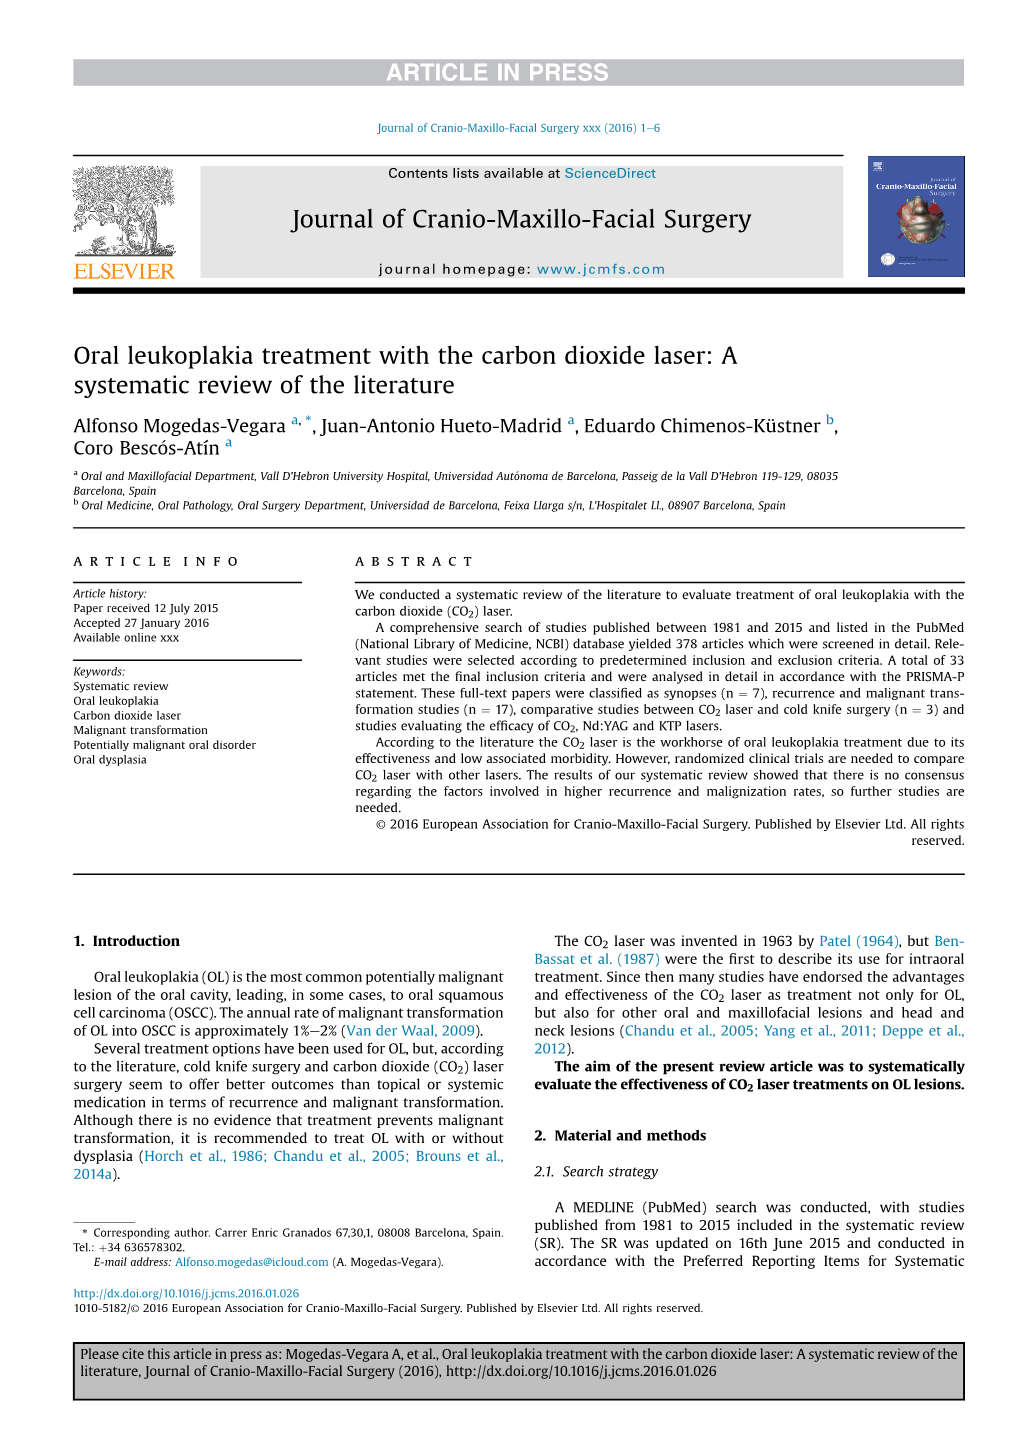 Oral Leukoplakia Treatment with the Carbon Dioxide Laser: a Systematic Review of the Literature